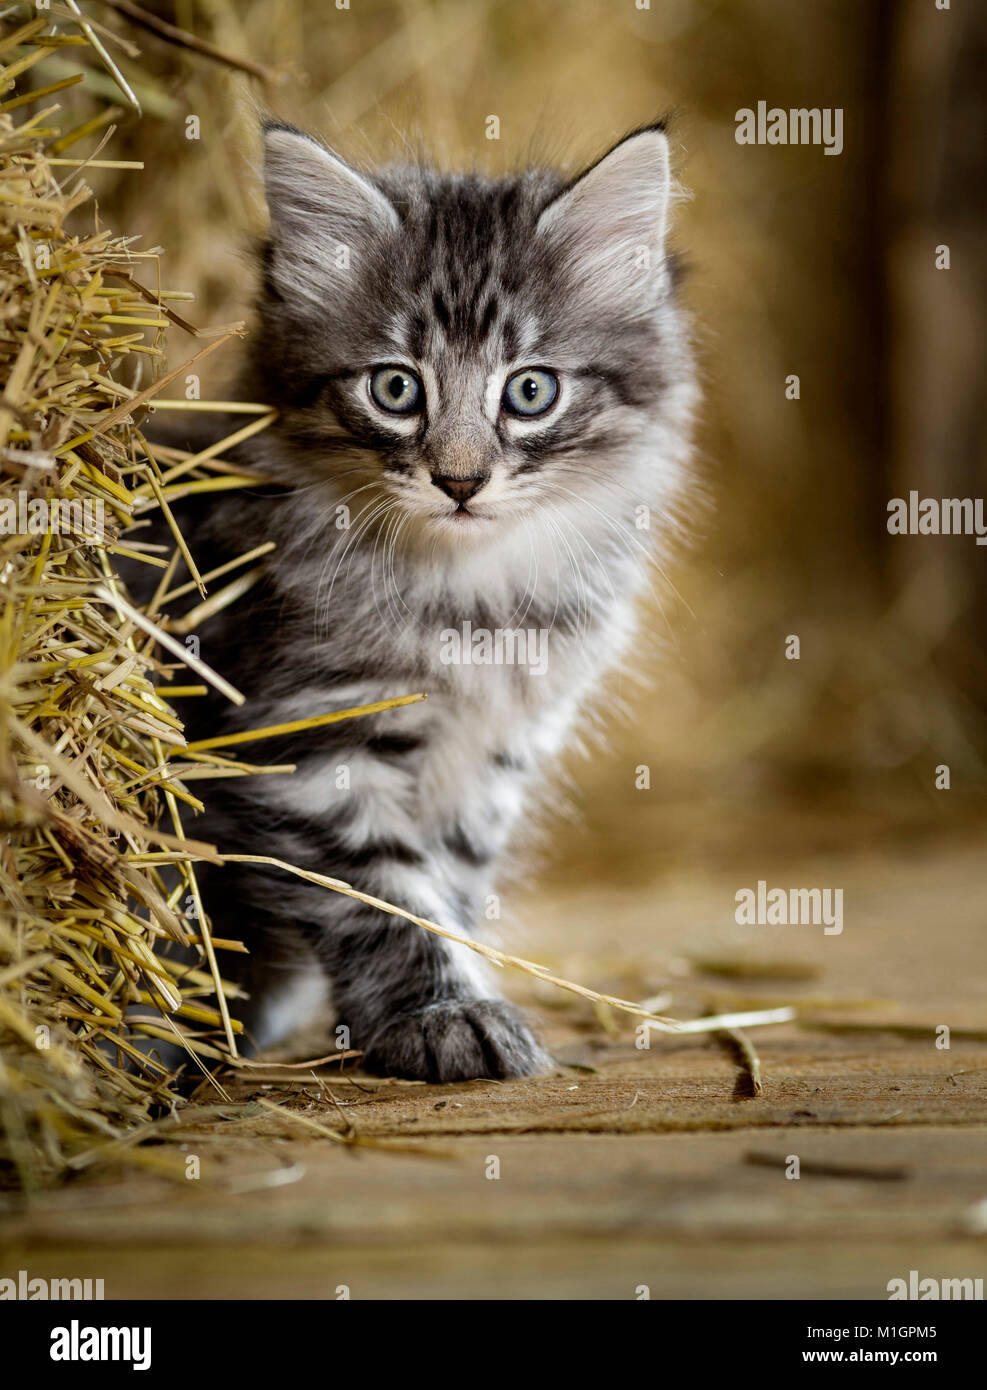 Norwegian Forest Cat. Kitten looking out from behind a bale of straw in a barn. Germany Stock Photo